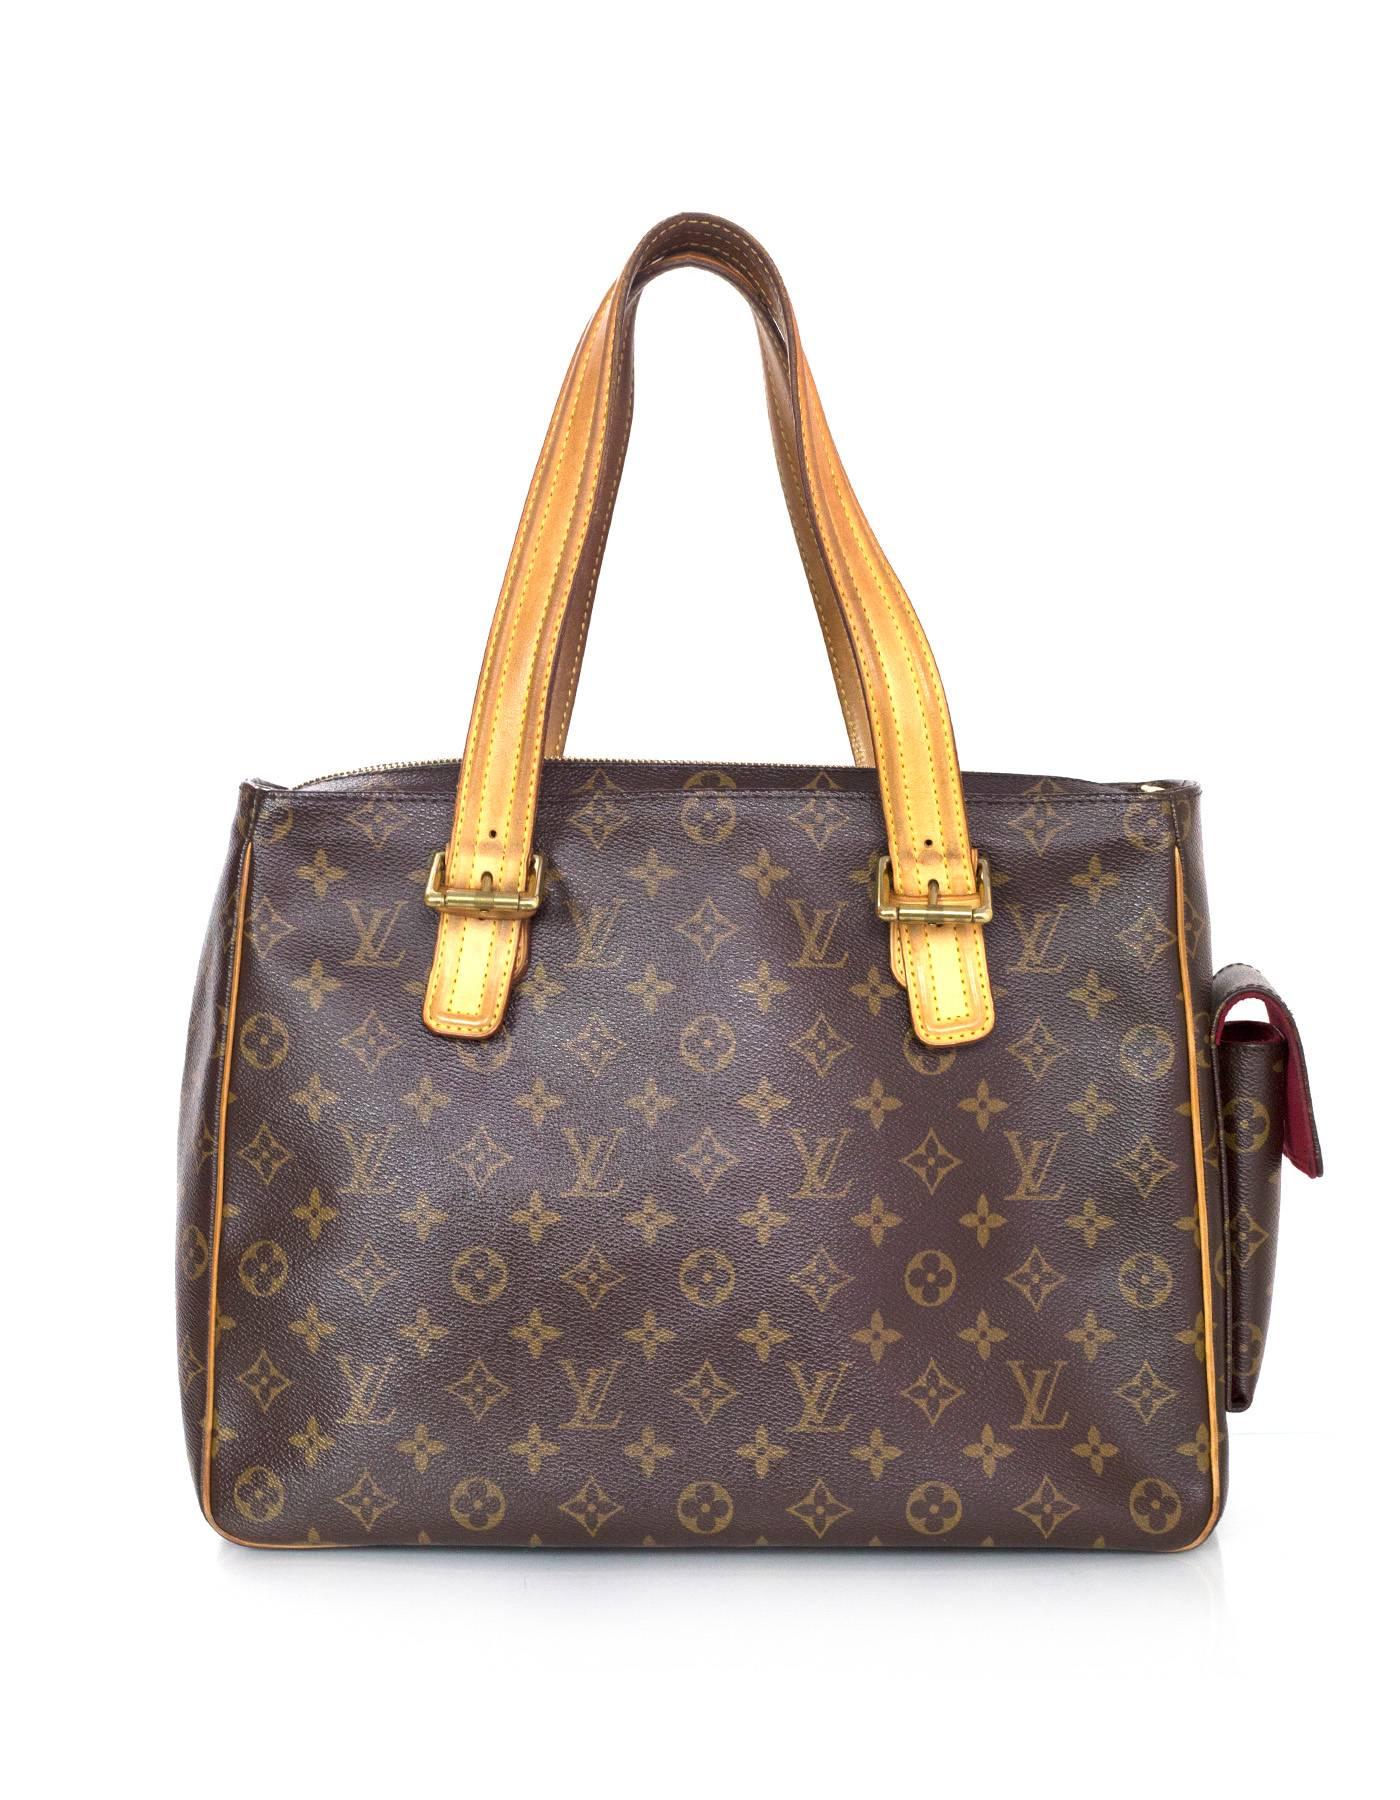 louis vuitton purse with two pockets in front